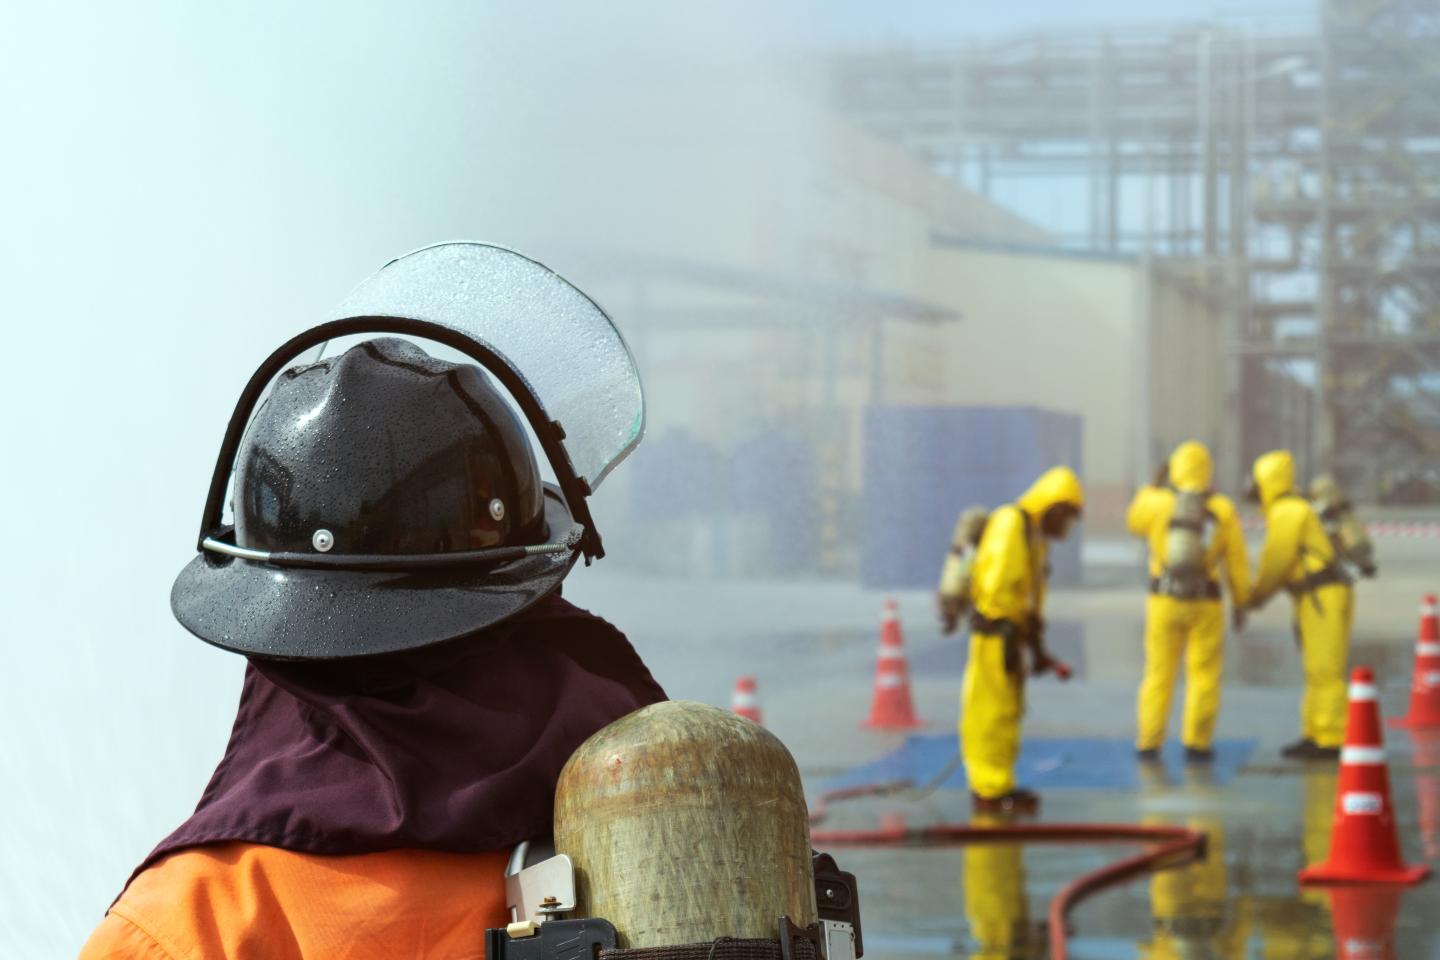 The new technology could help to protect emergency services and first responders from chemical hazards. Source: Shutterstock